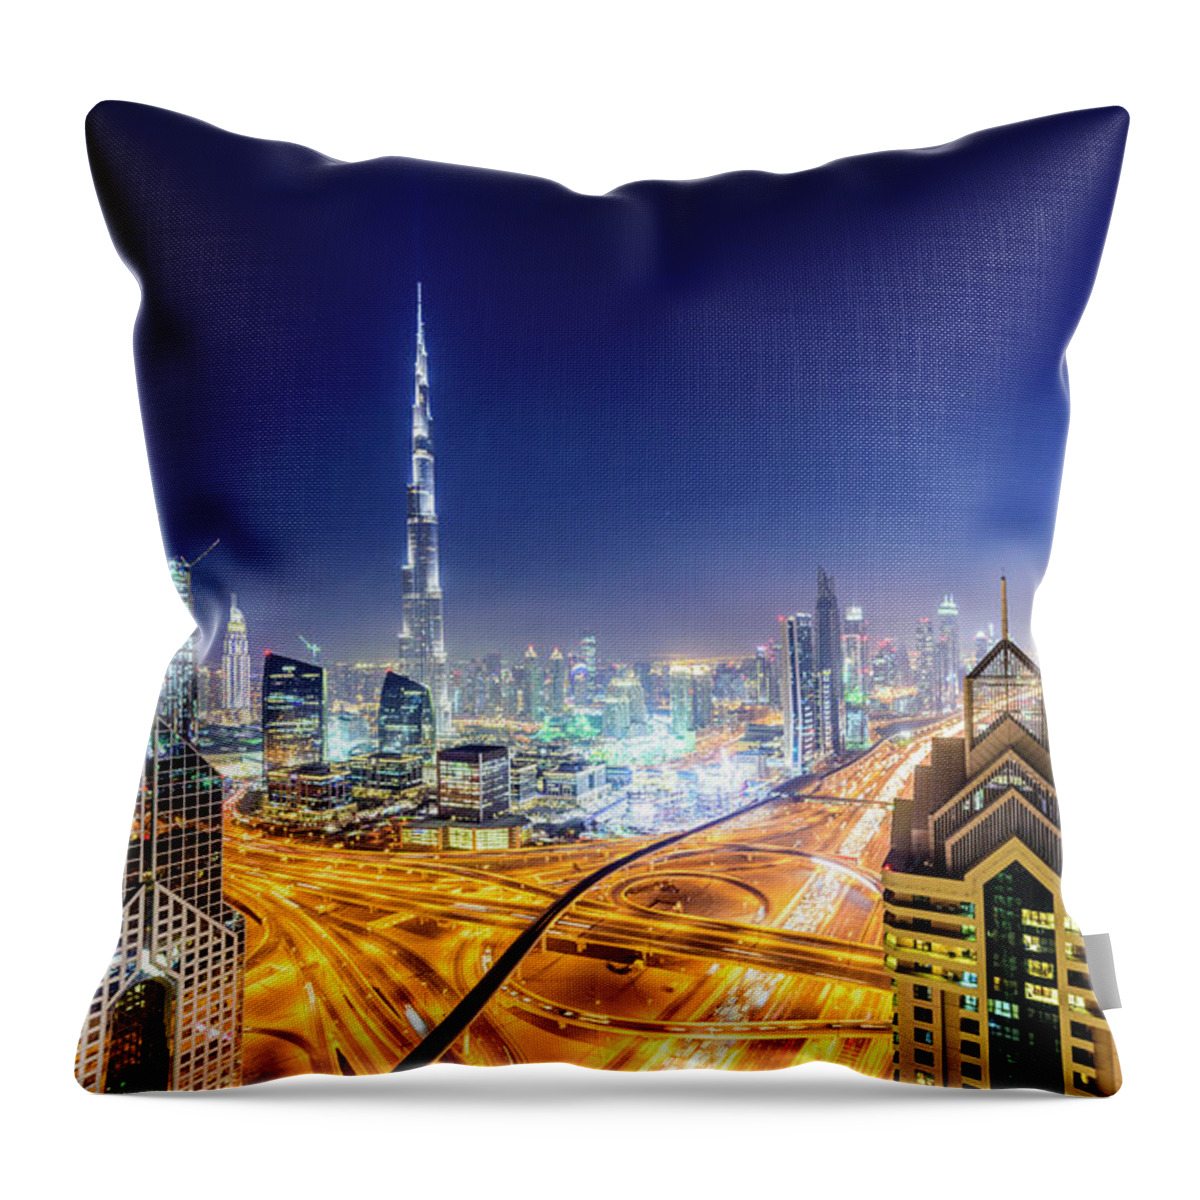 Arabia Throw Pillow featuring the photograph Dubai Downtown Skyline At Night by Johnnygreig